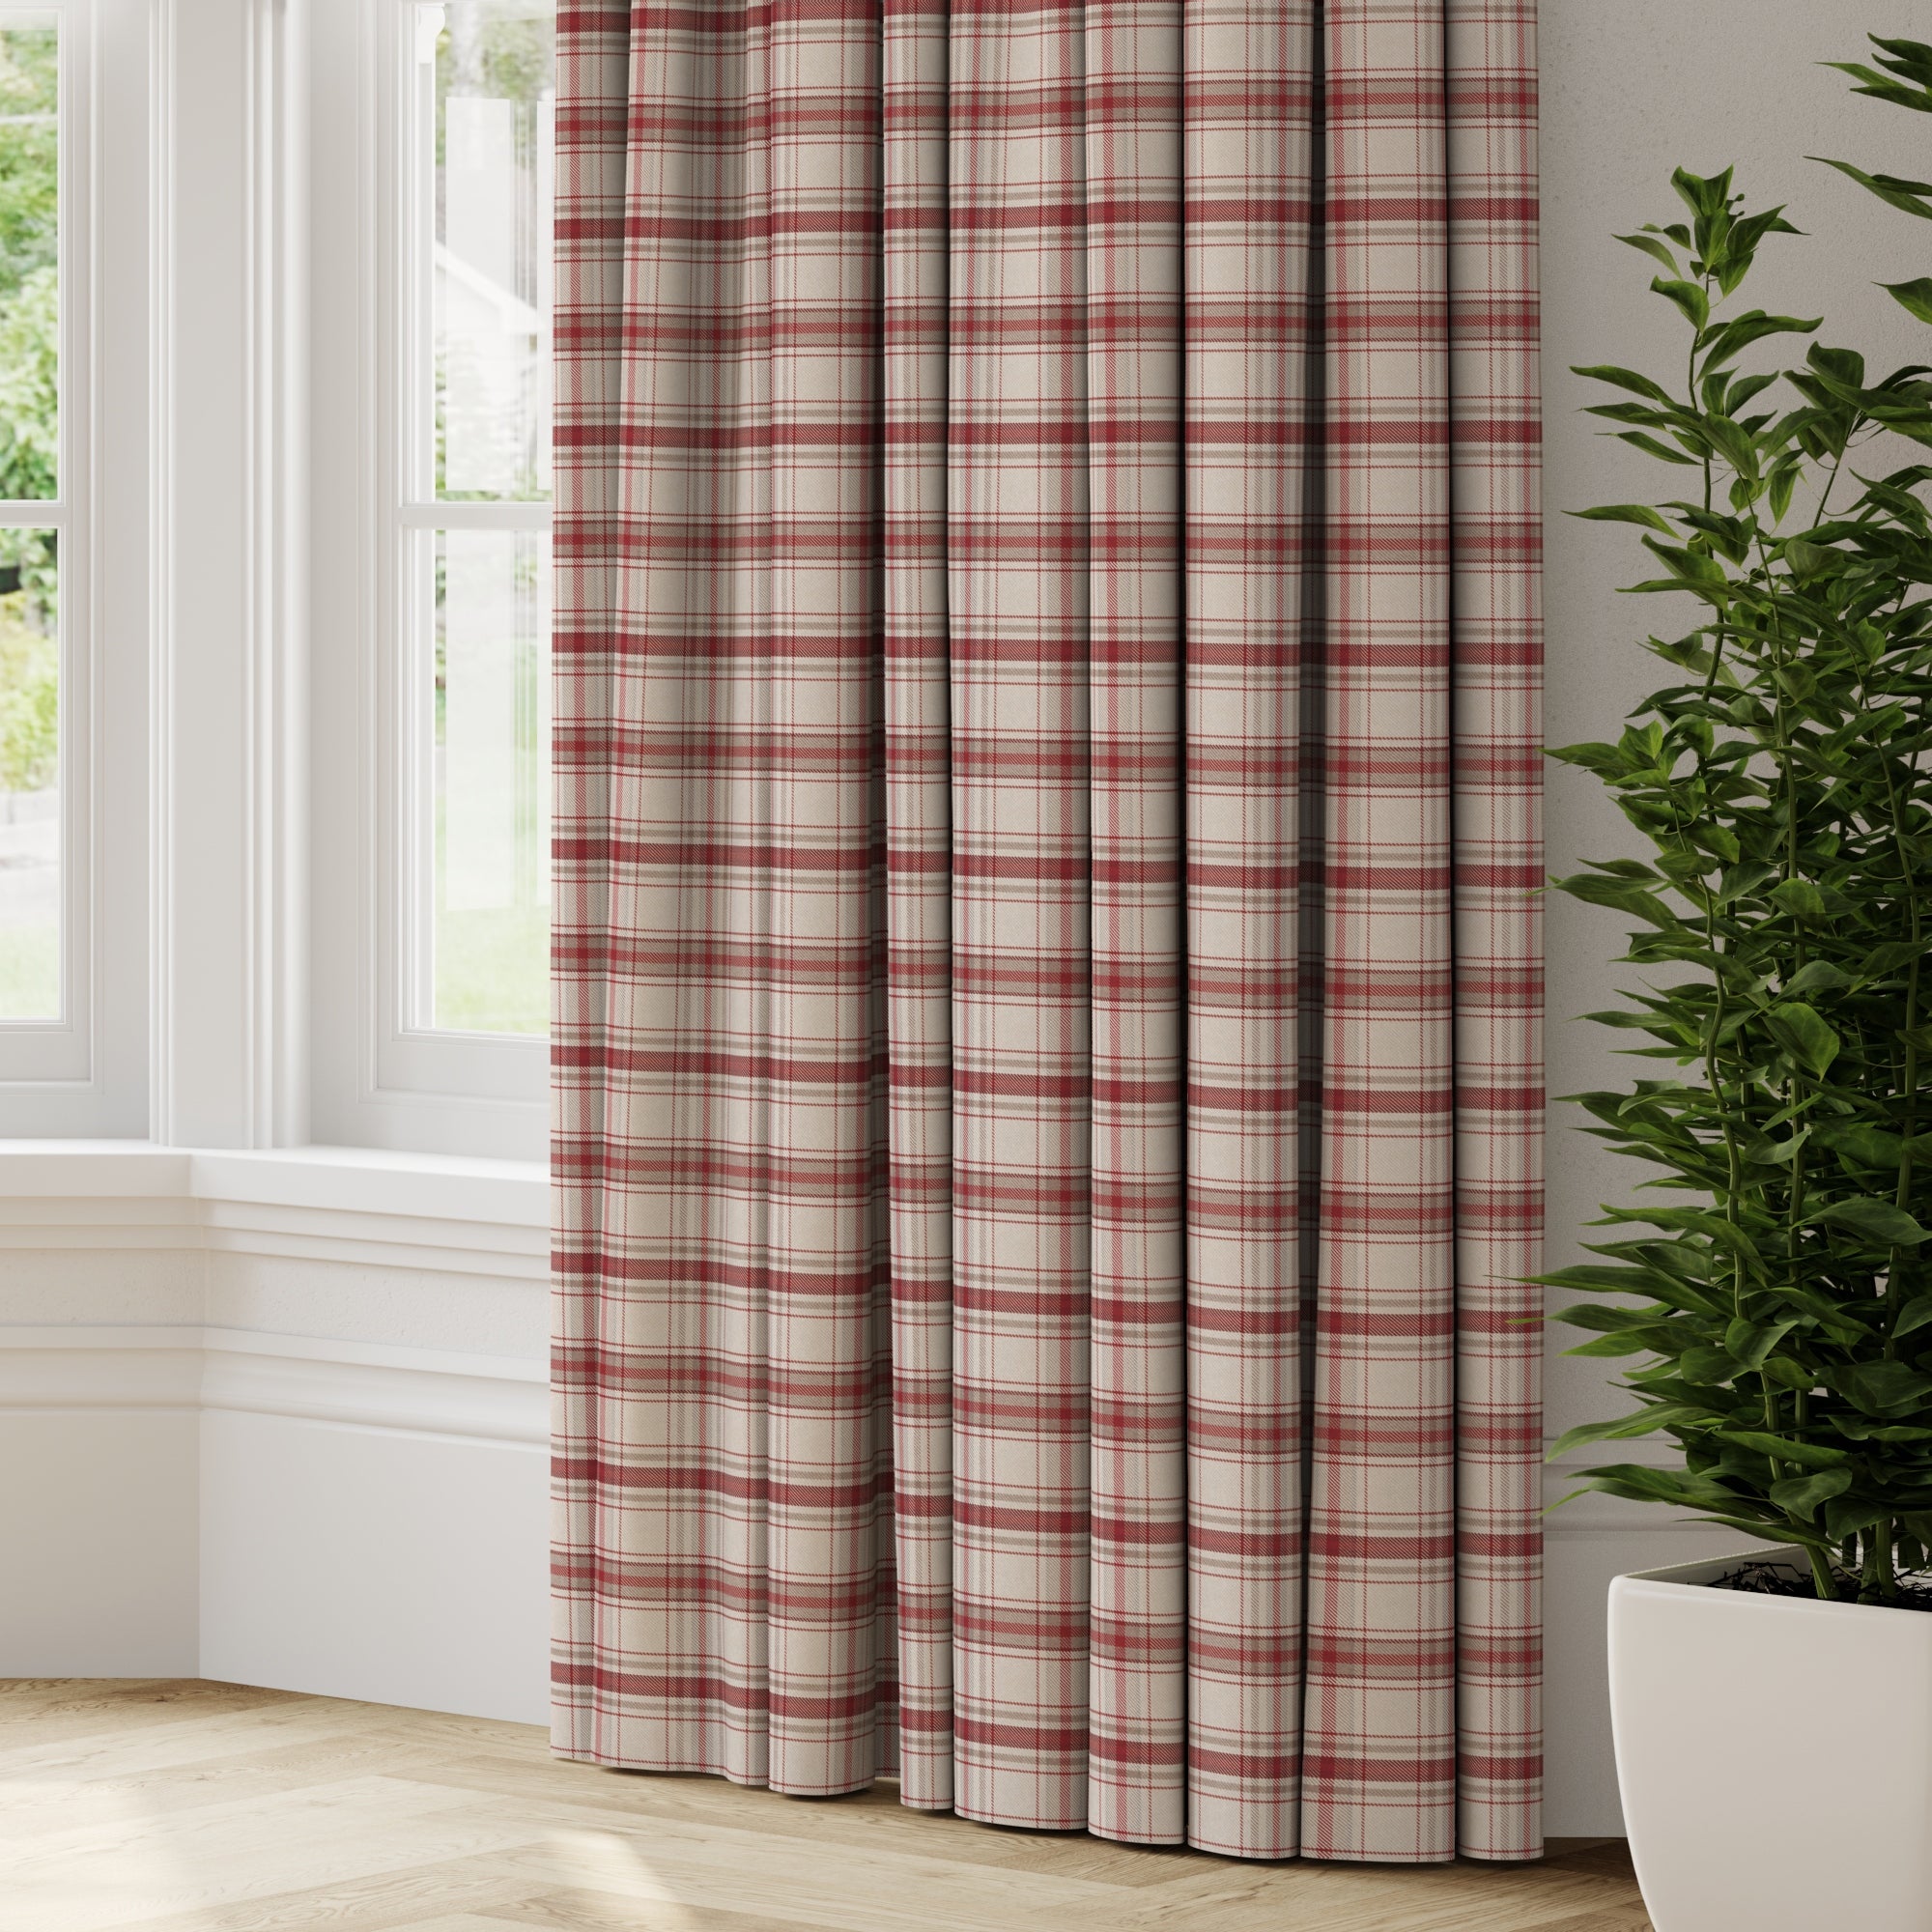 Esk Made to Measure Fire Retardant Curtains Red/White